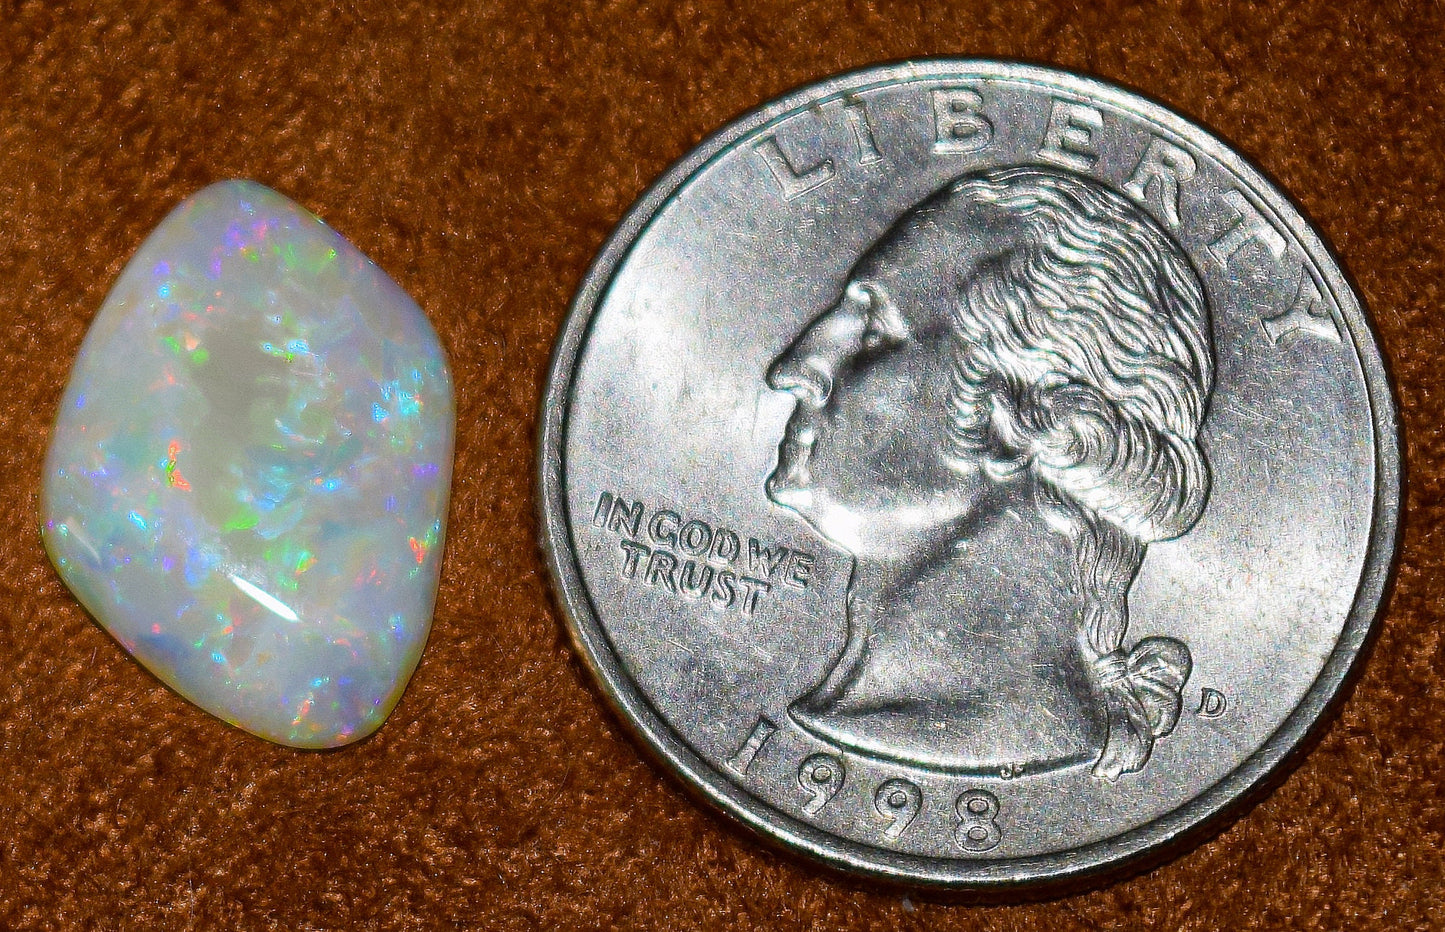 KAZOWIE! Wanna be seen from across the room? This Opal should do the trick!